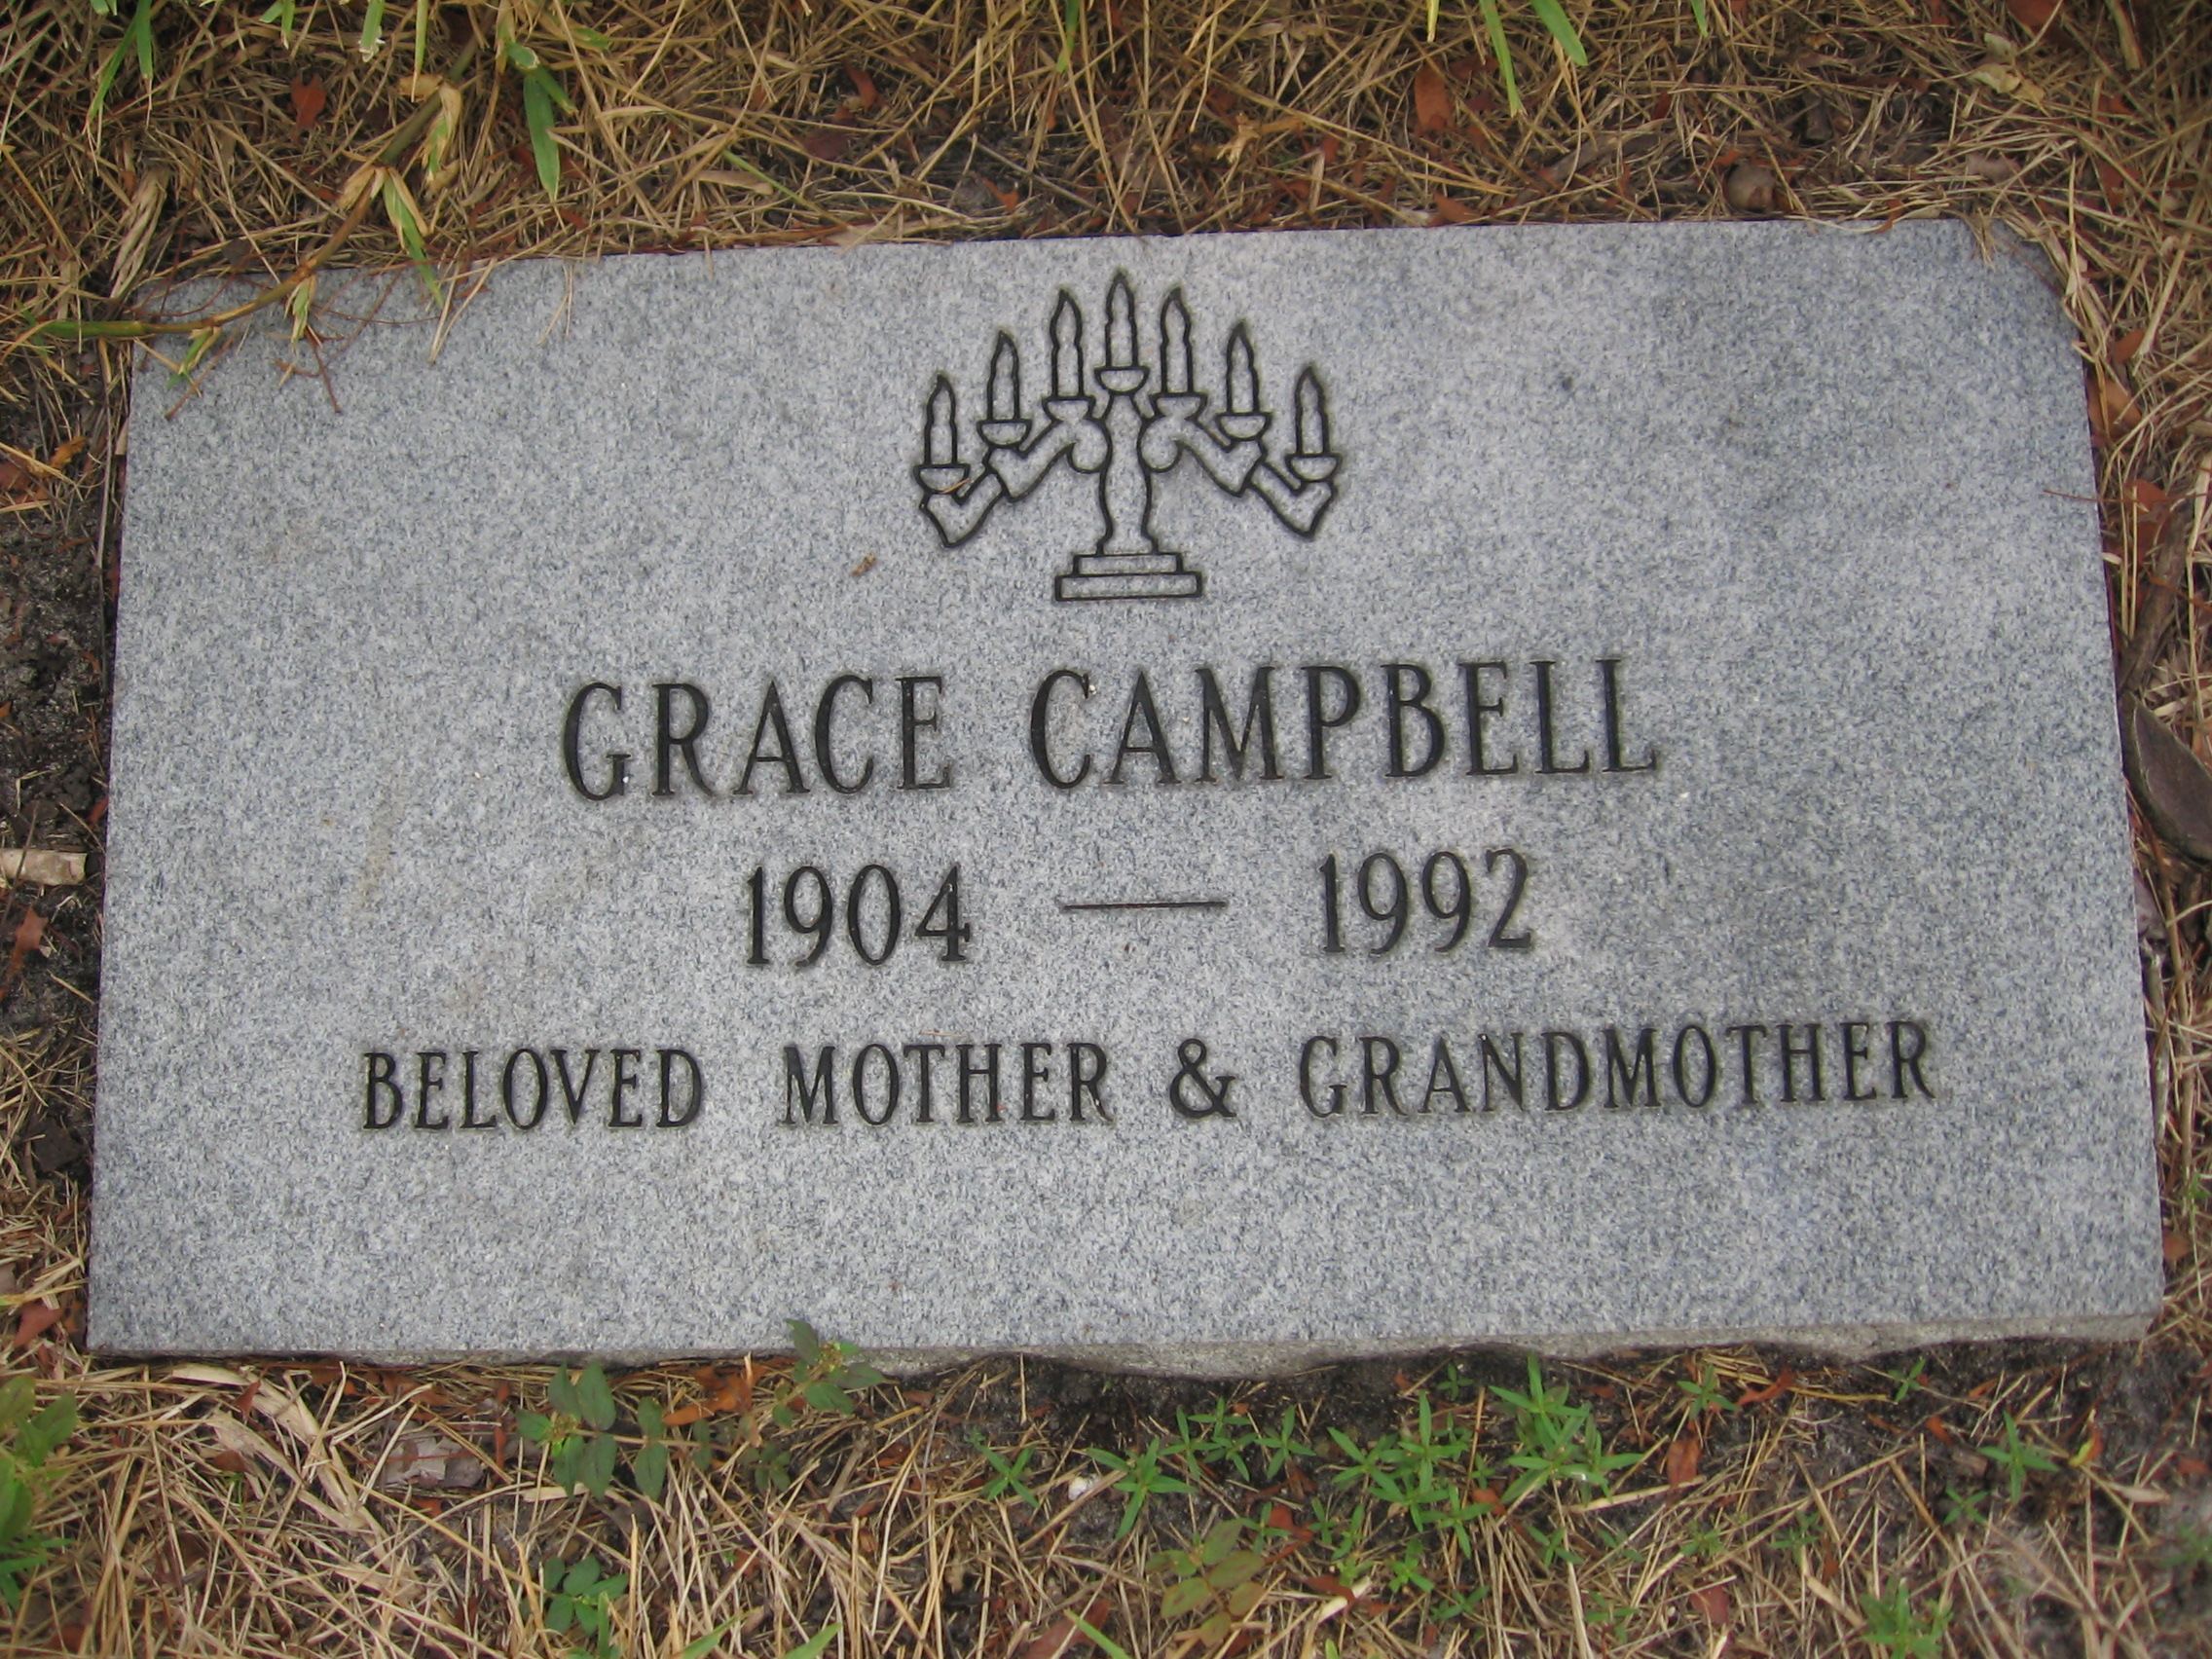 Grace Campbell